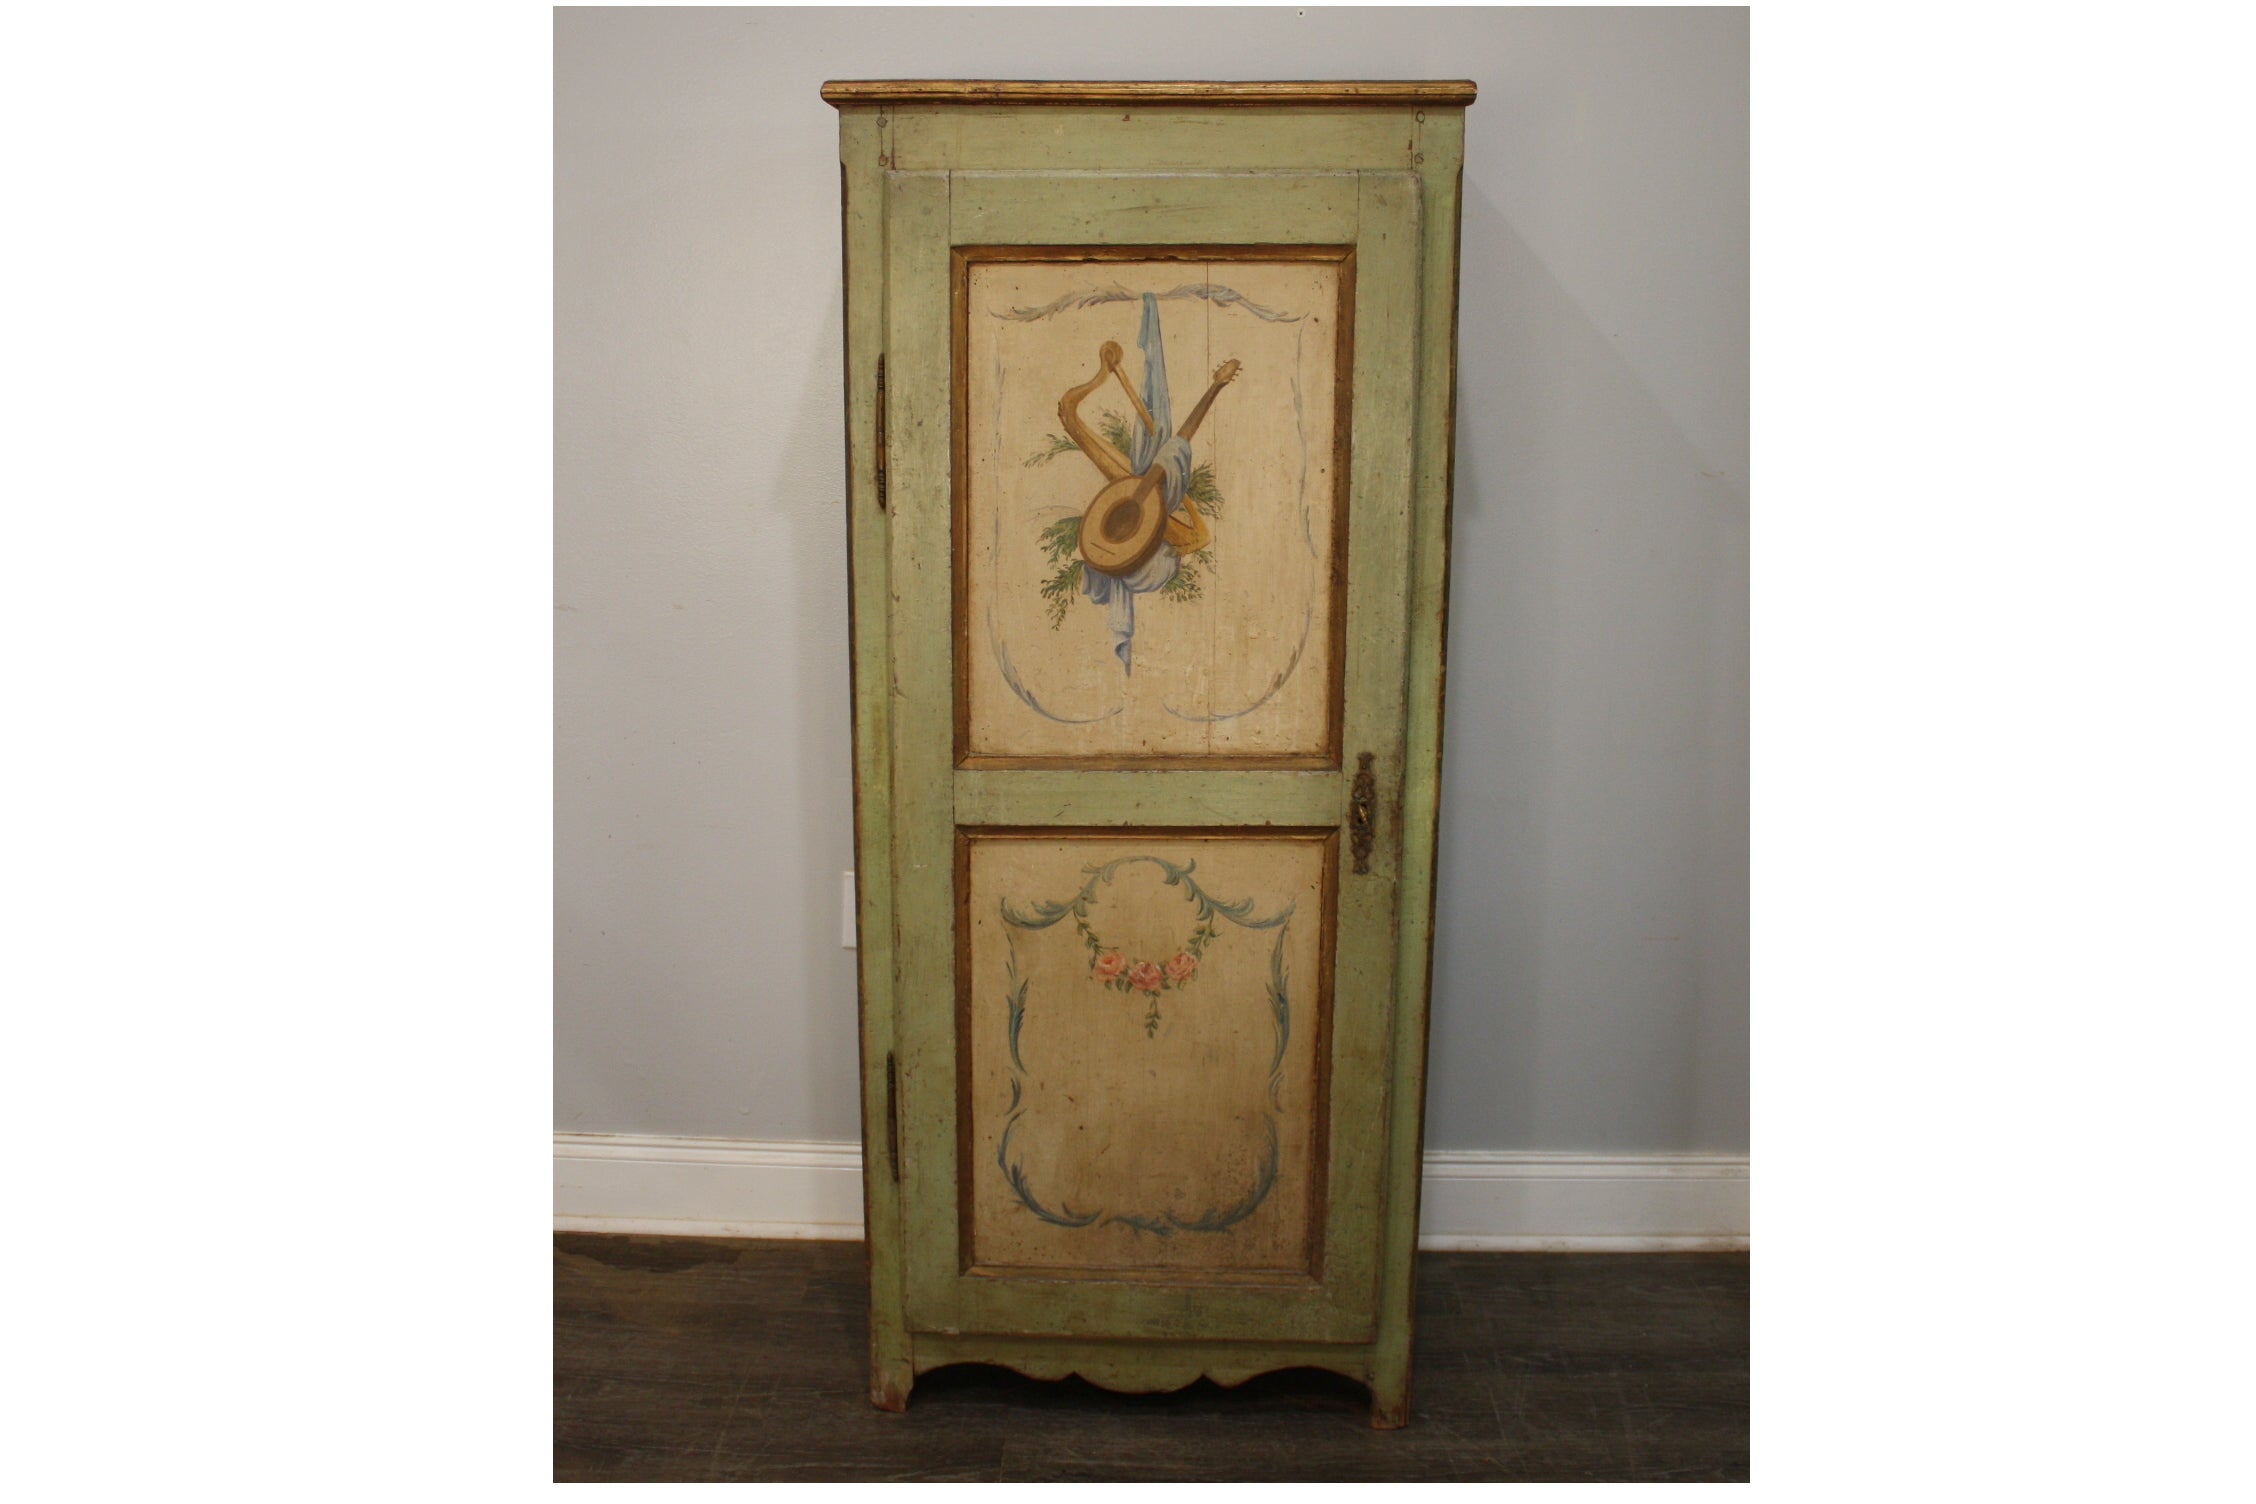 This Tall Cabinet called Bonnetiere has its original painted in the style of Louis XVI with the attribute of music. 